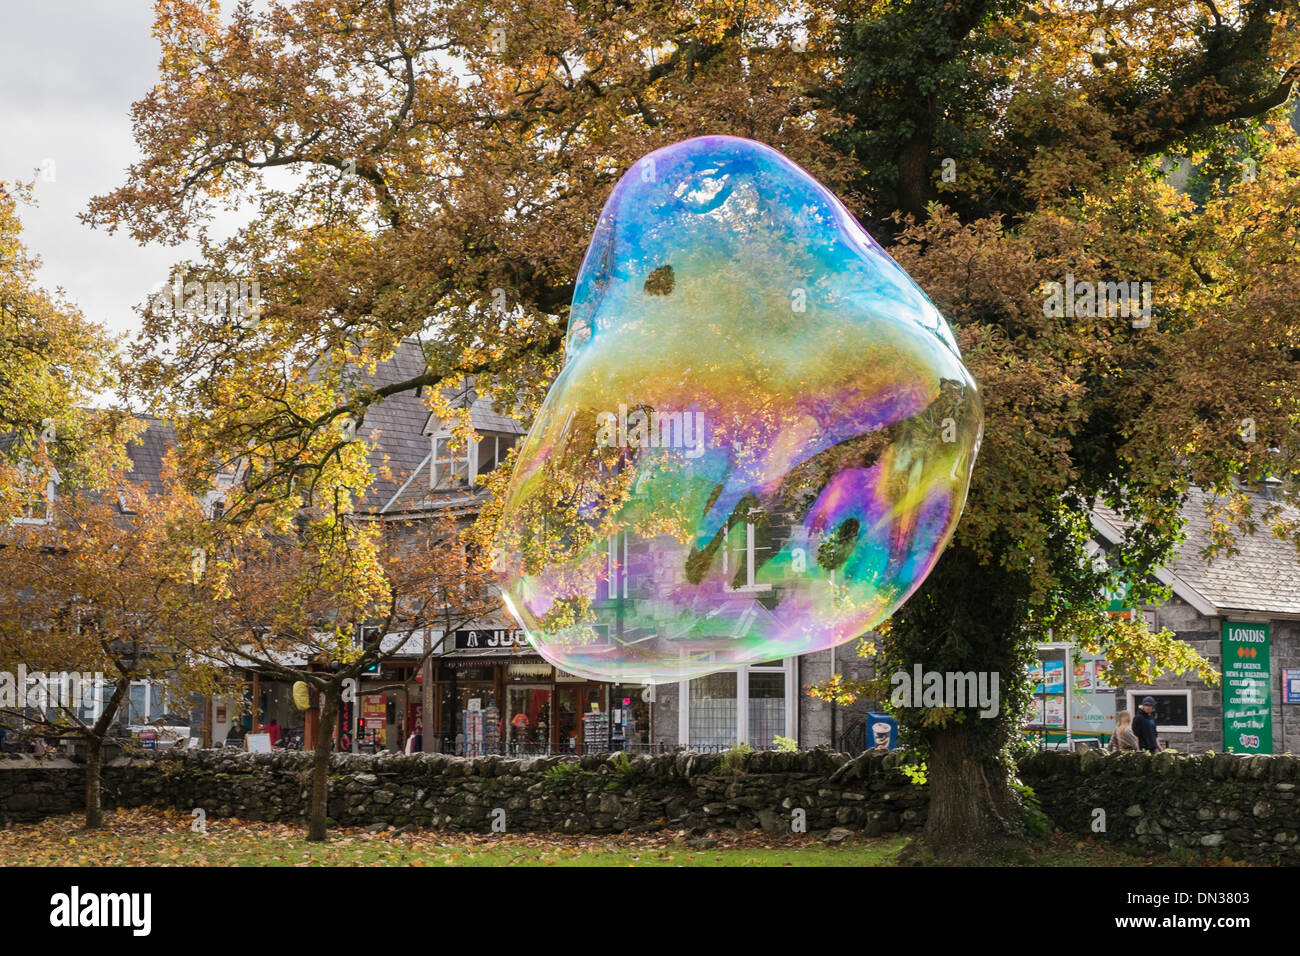 A giant soap bubble showing rainbow colours floats in air through Betws-y-Coed, Conwy, North Wales, UK, Britain Stock Photo